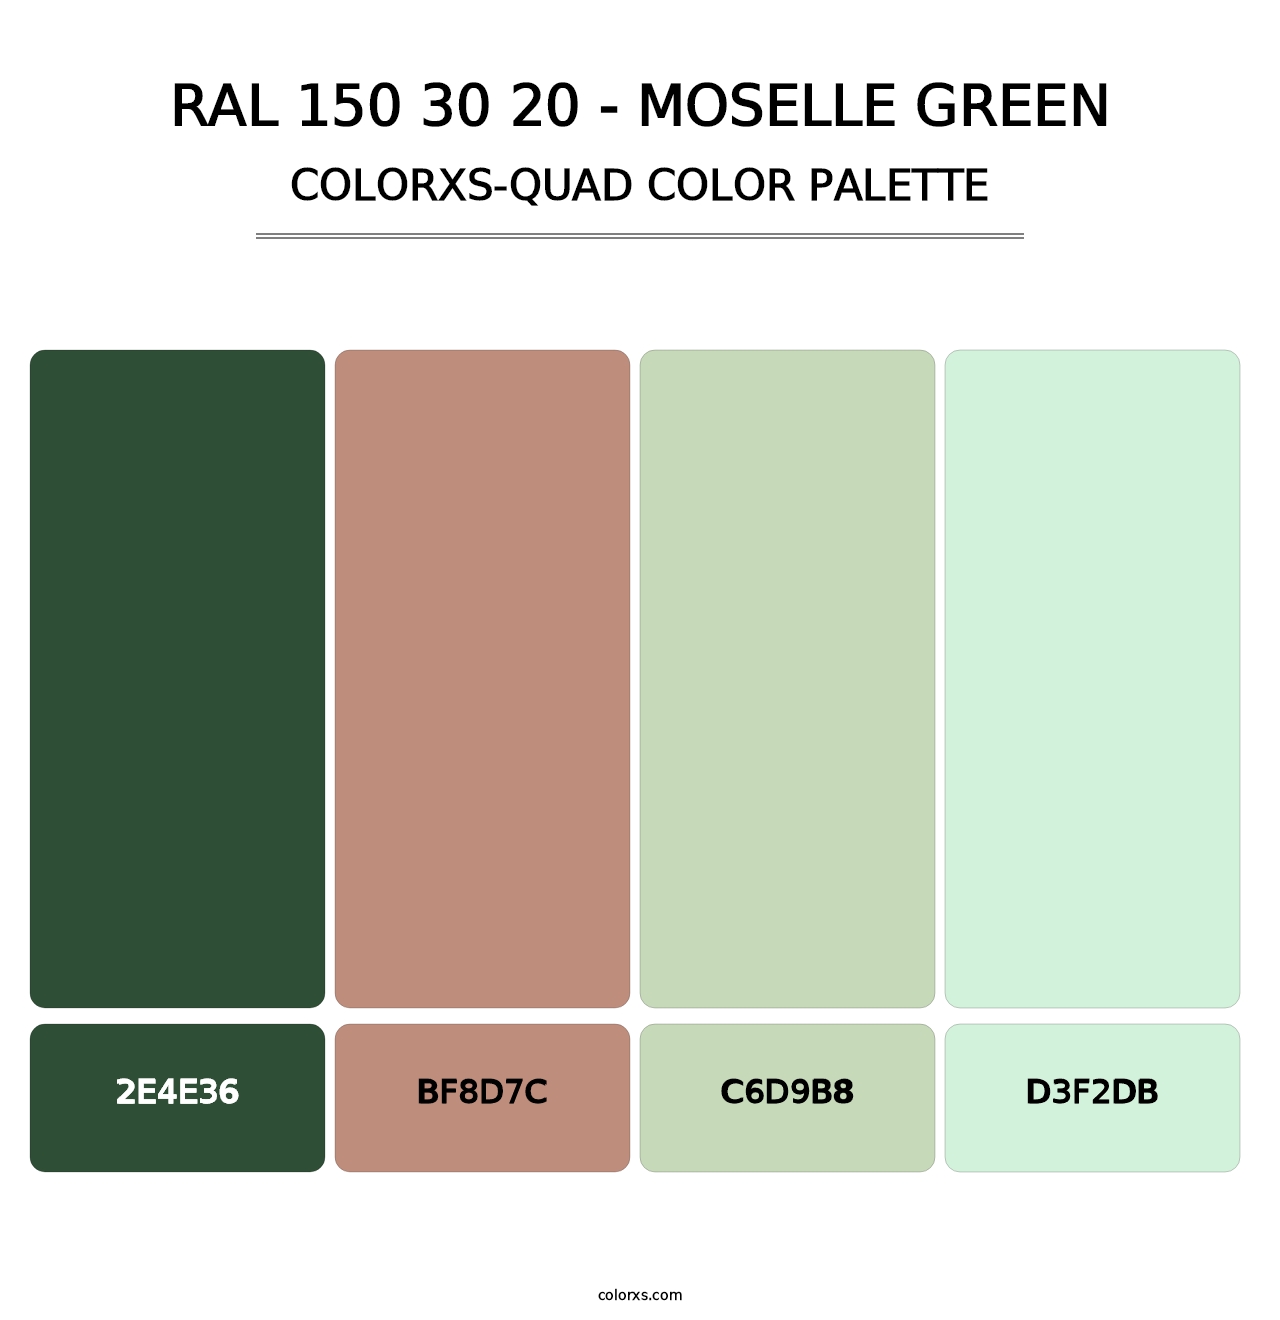 RAL 150 30 20 - Moselle Green - Colorxs Quad Palette